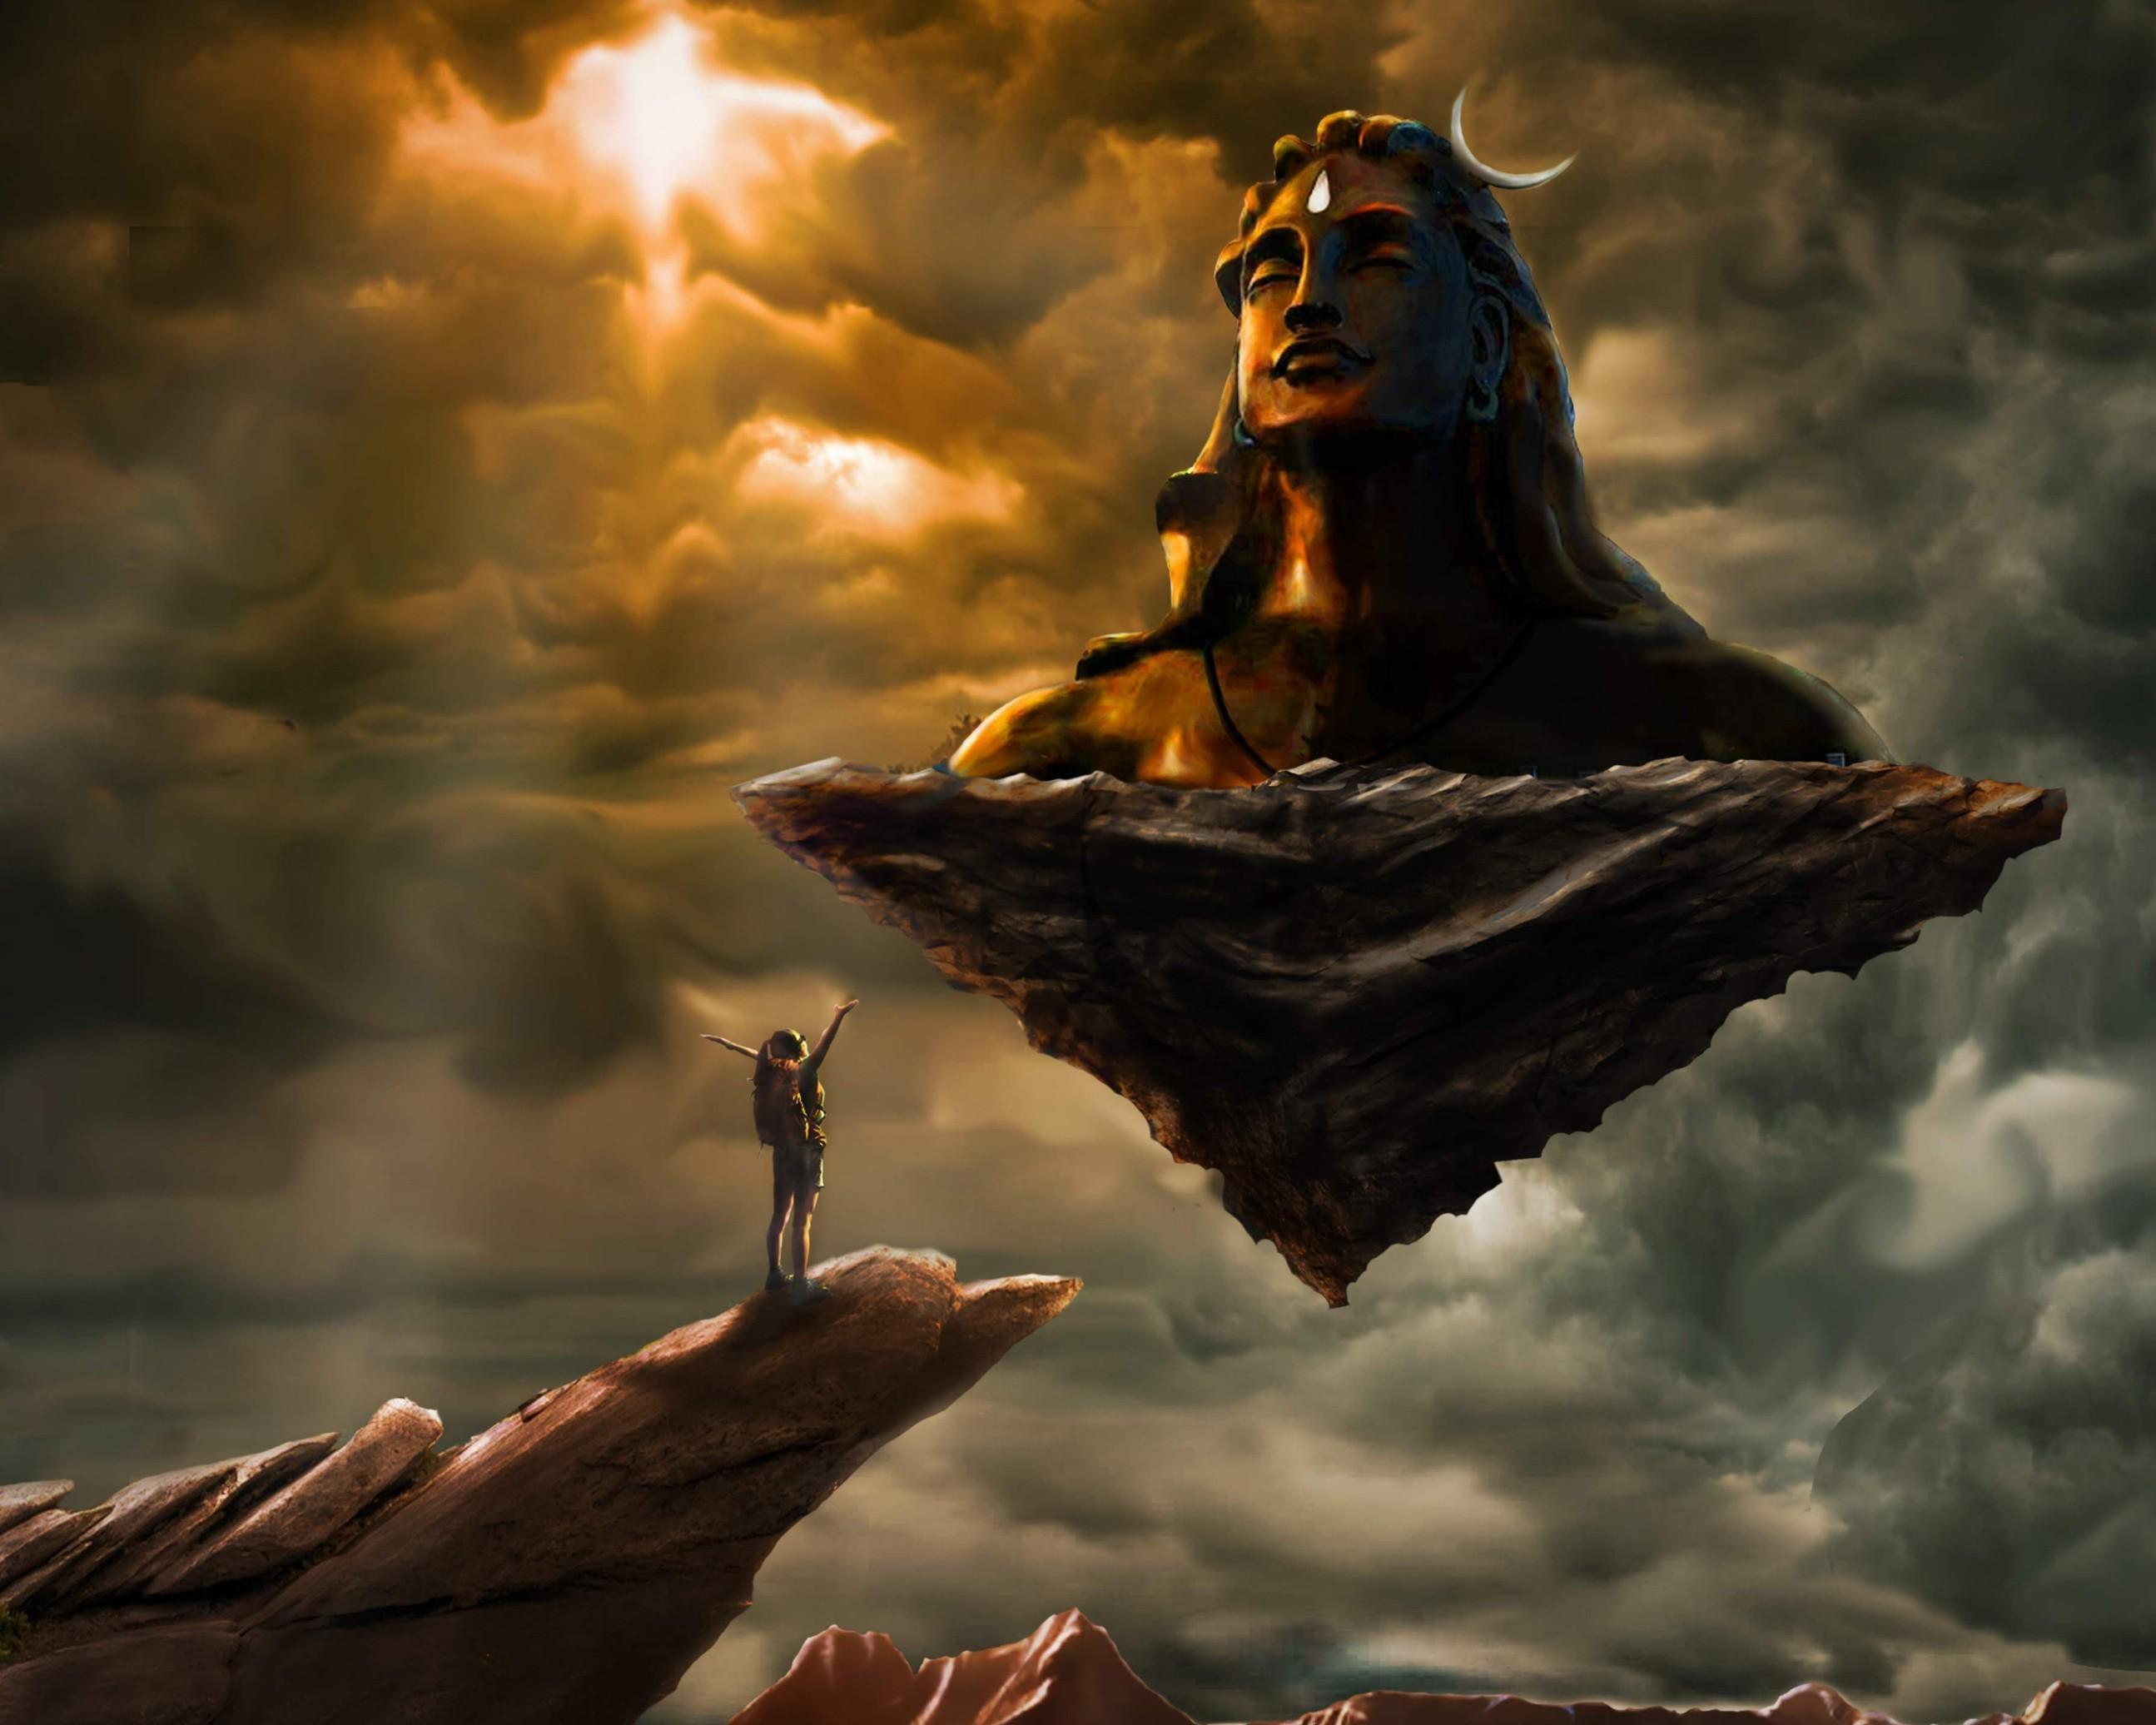 Angry Lord Shiva 4k Ultra Hd Wallpaper For Pc | Webphotos.org